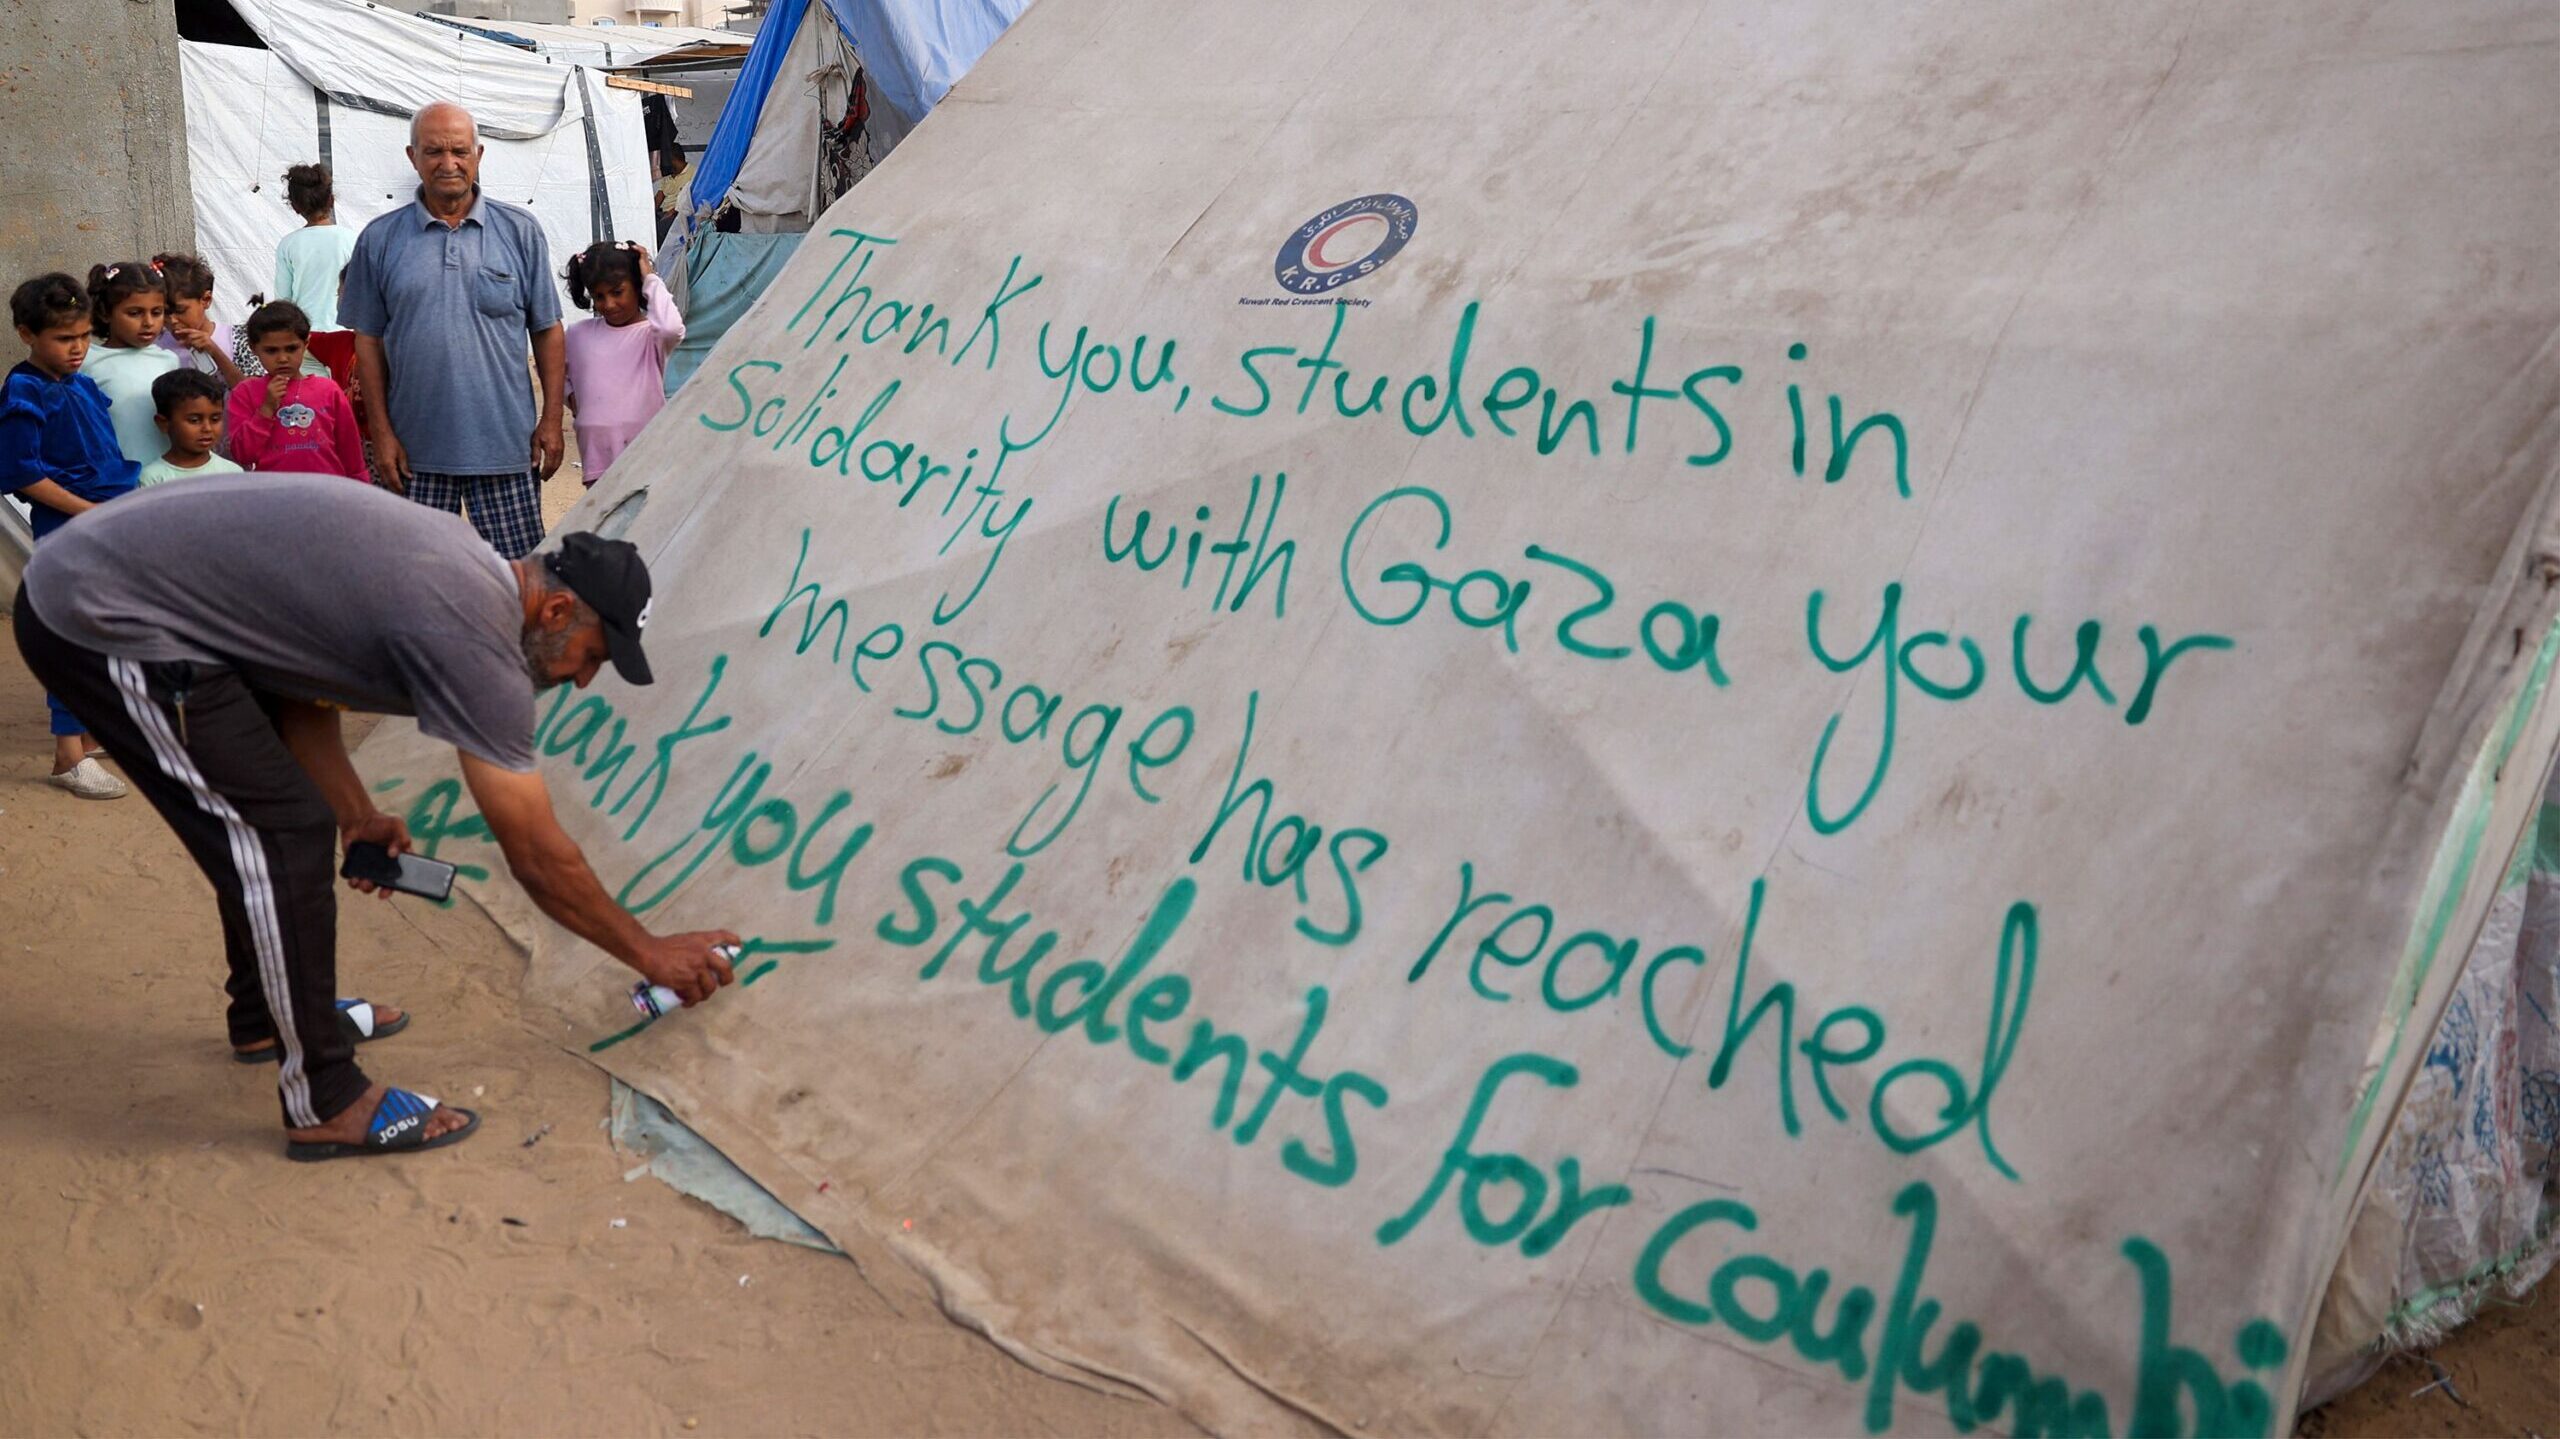 Students and children in Gaza thank pro-Palestinian protesters at US college campuses [Video]